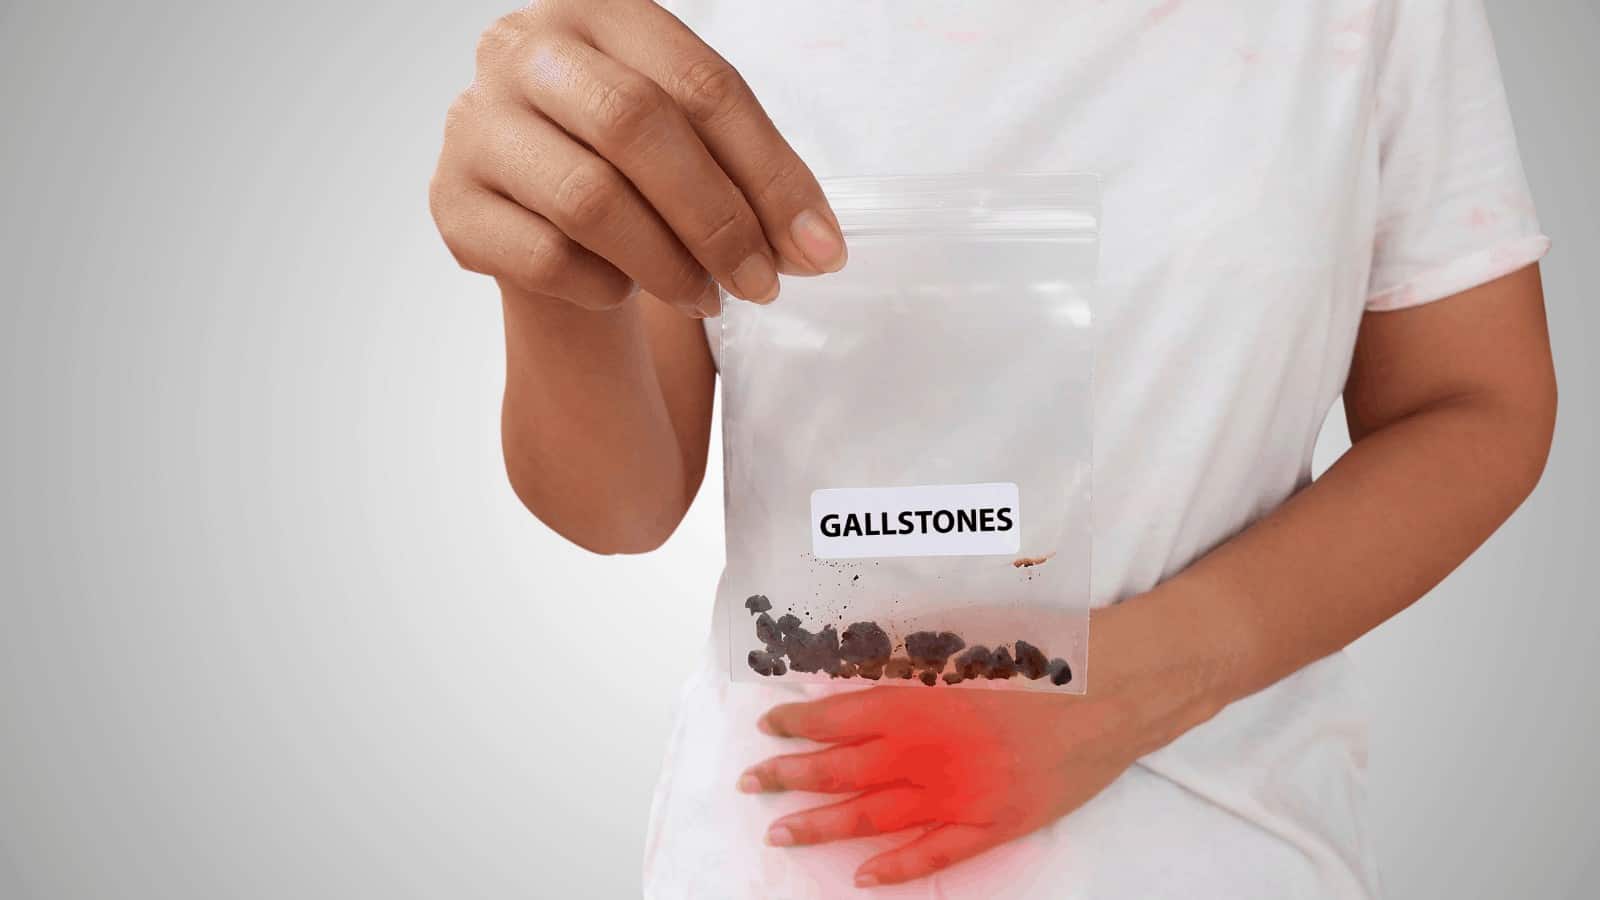 Doctors Explain Causes + Symptoms of Gallstones (and How to Fix Them)